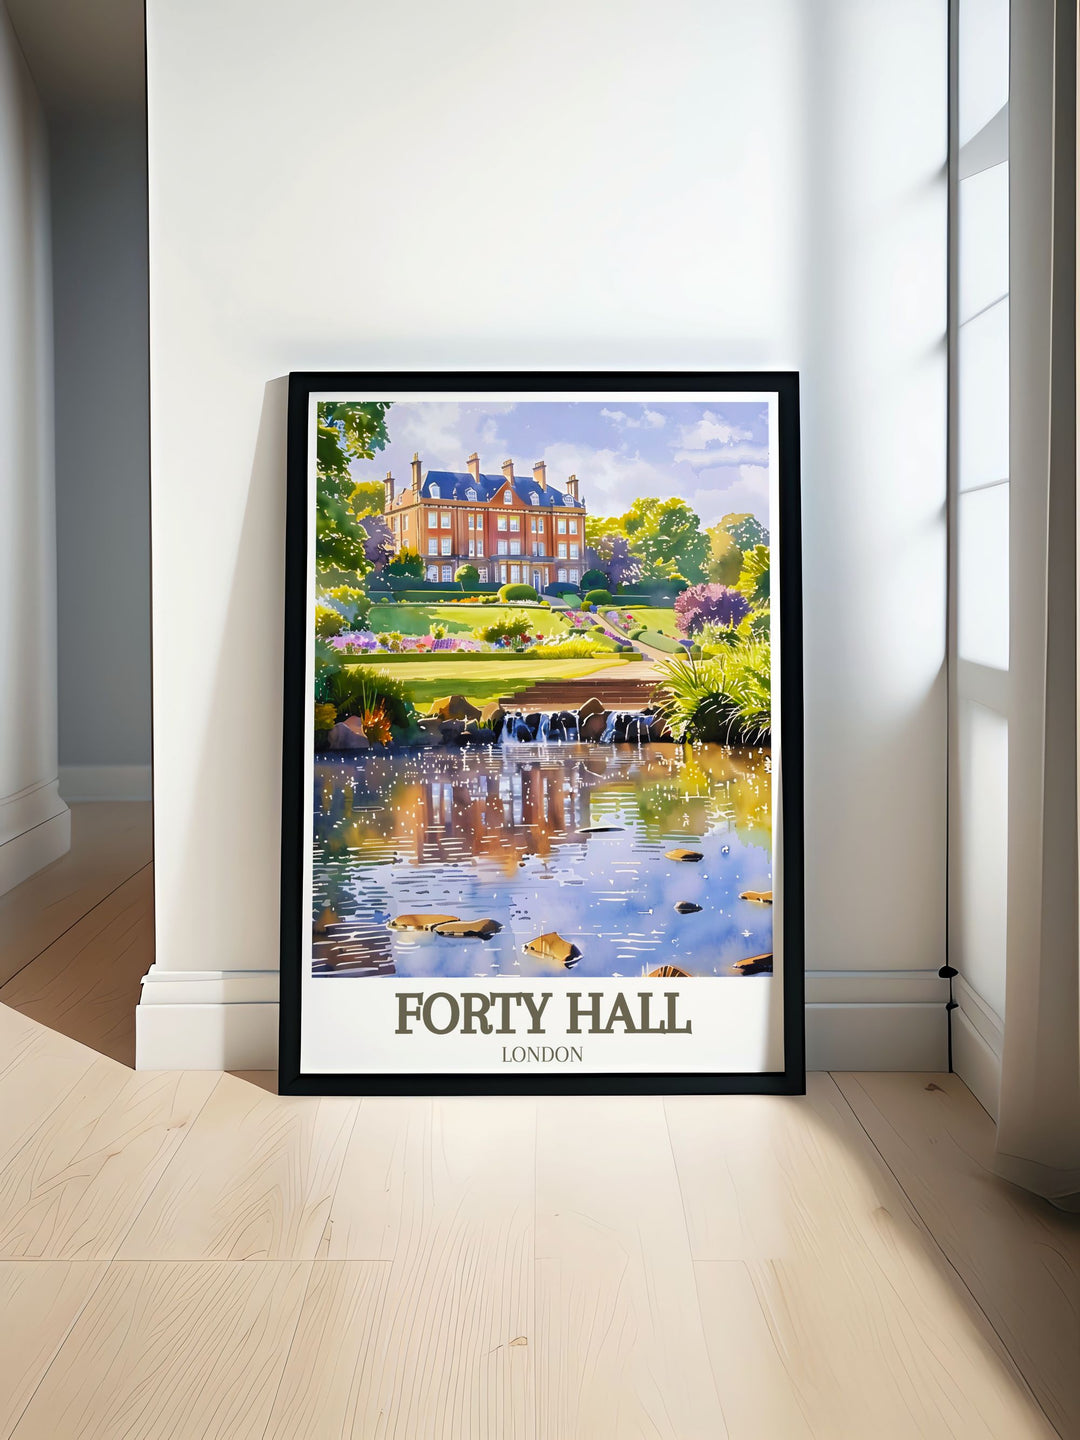 This print features the architectural splendor of Forty Hall House, inviting viewers to explore its richly decorated rooms and historic charm.